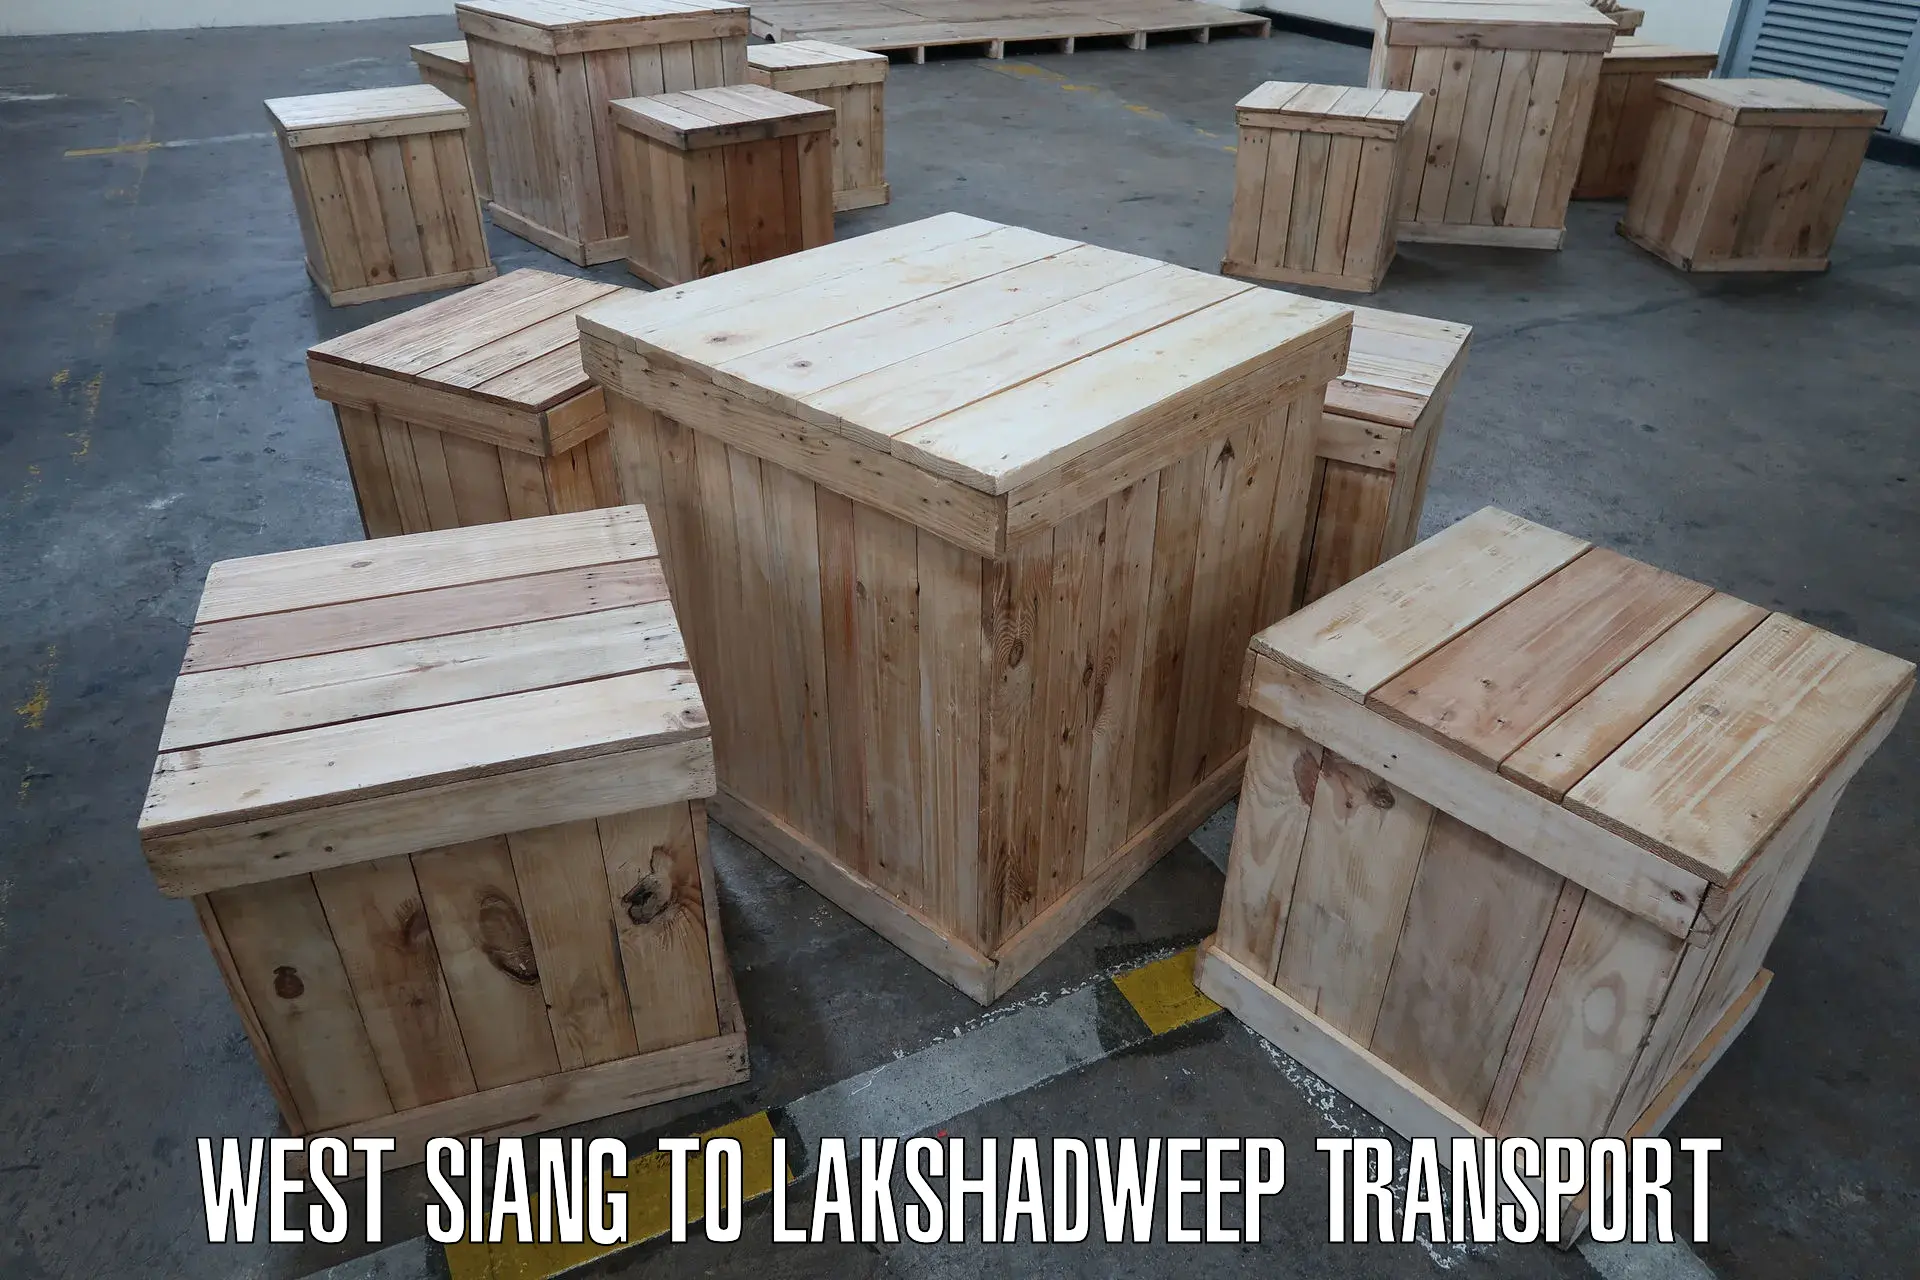 Daily parcel service transport West Siang to Lakshadweep